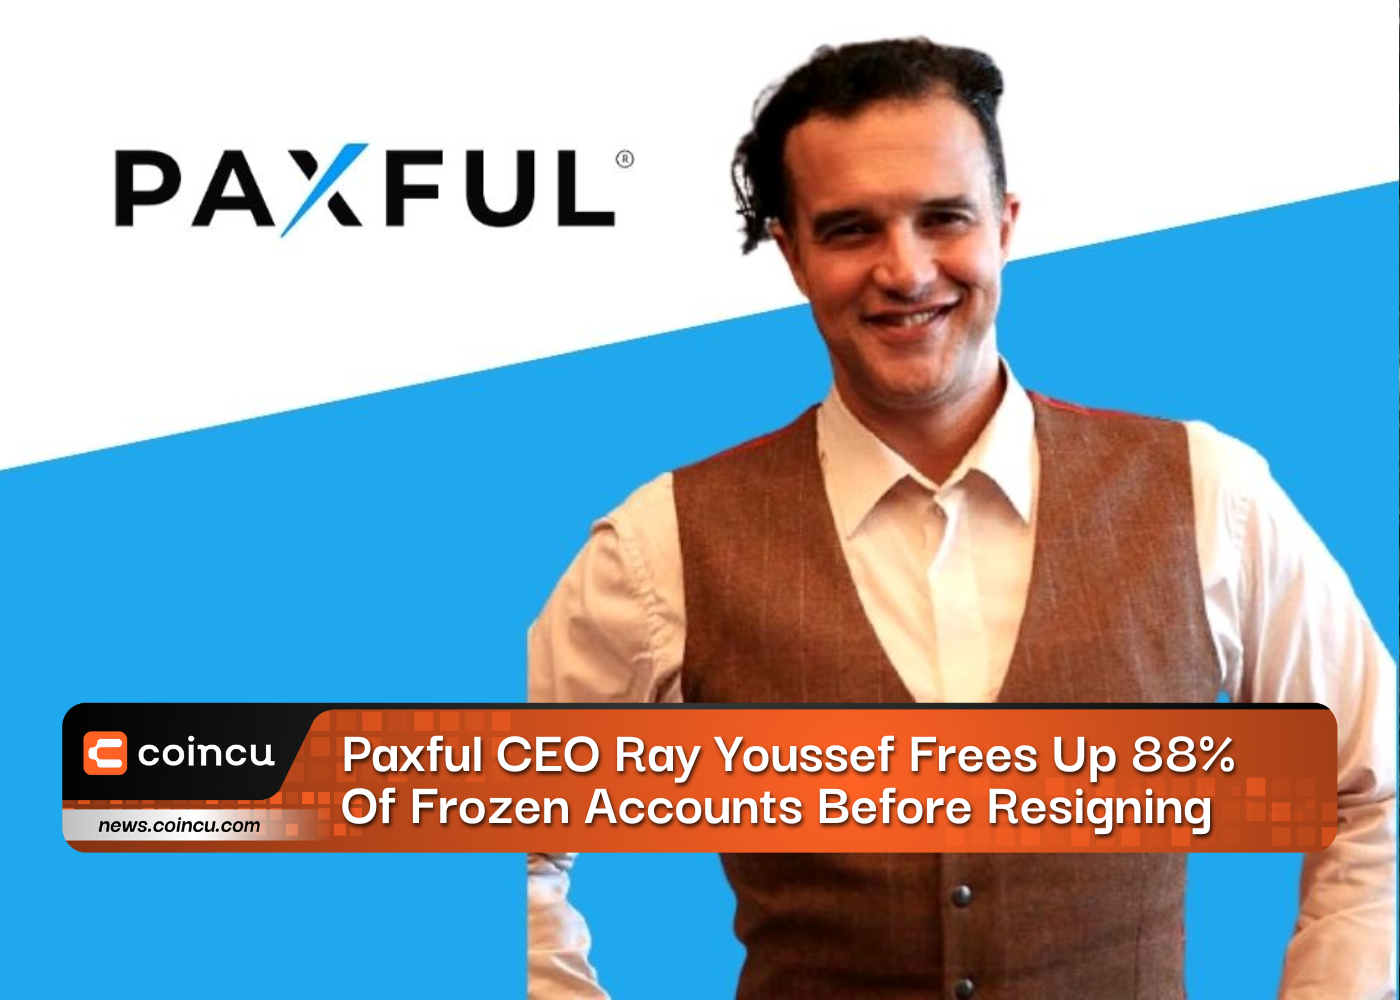 Paxful CEO Ray Youssef Frees Up 88% Of Frozen Accounts Before Resigning